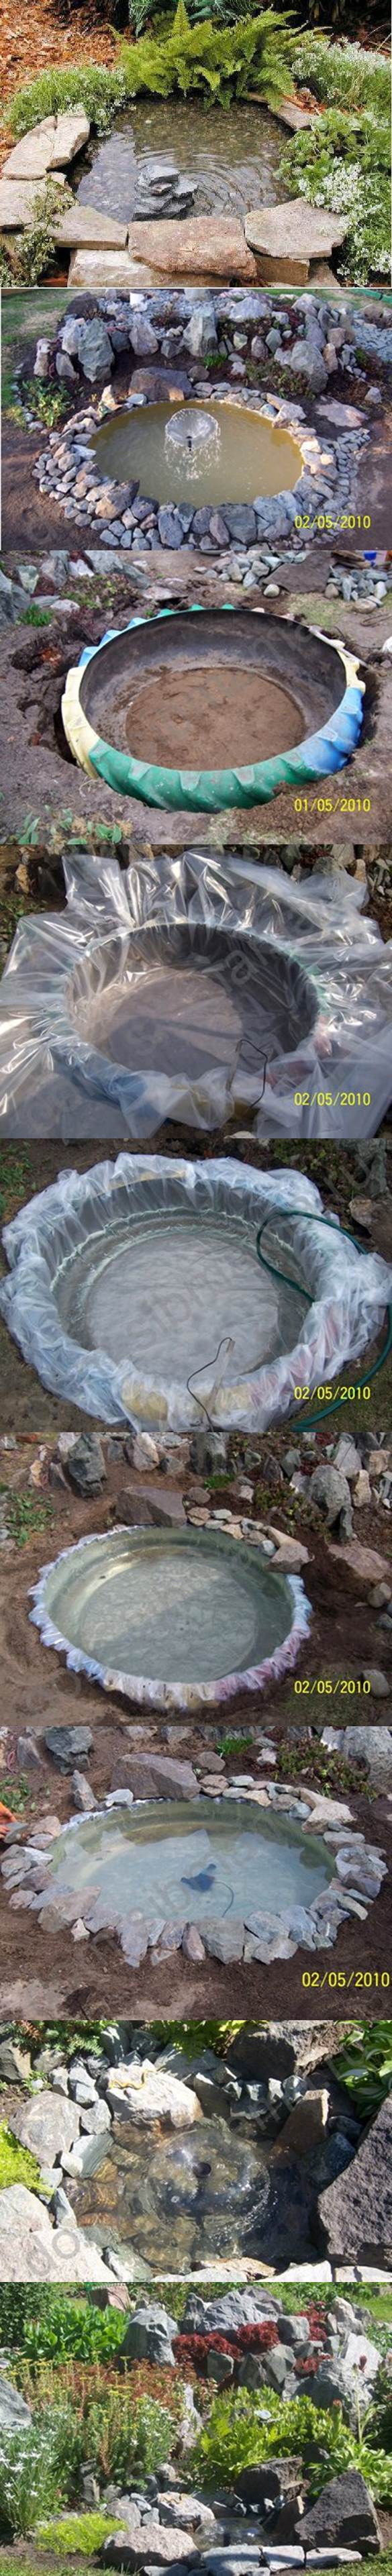 Create an Extraordinary DIY Pond From An Upcycled Old Tire!